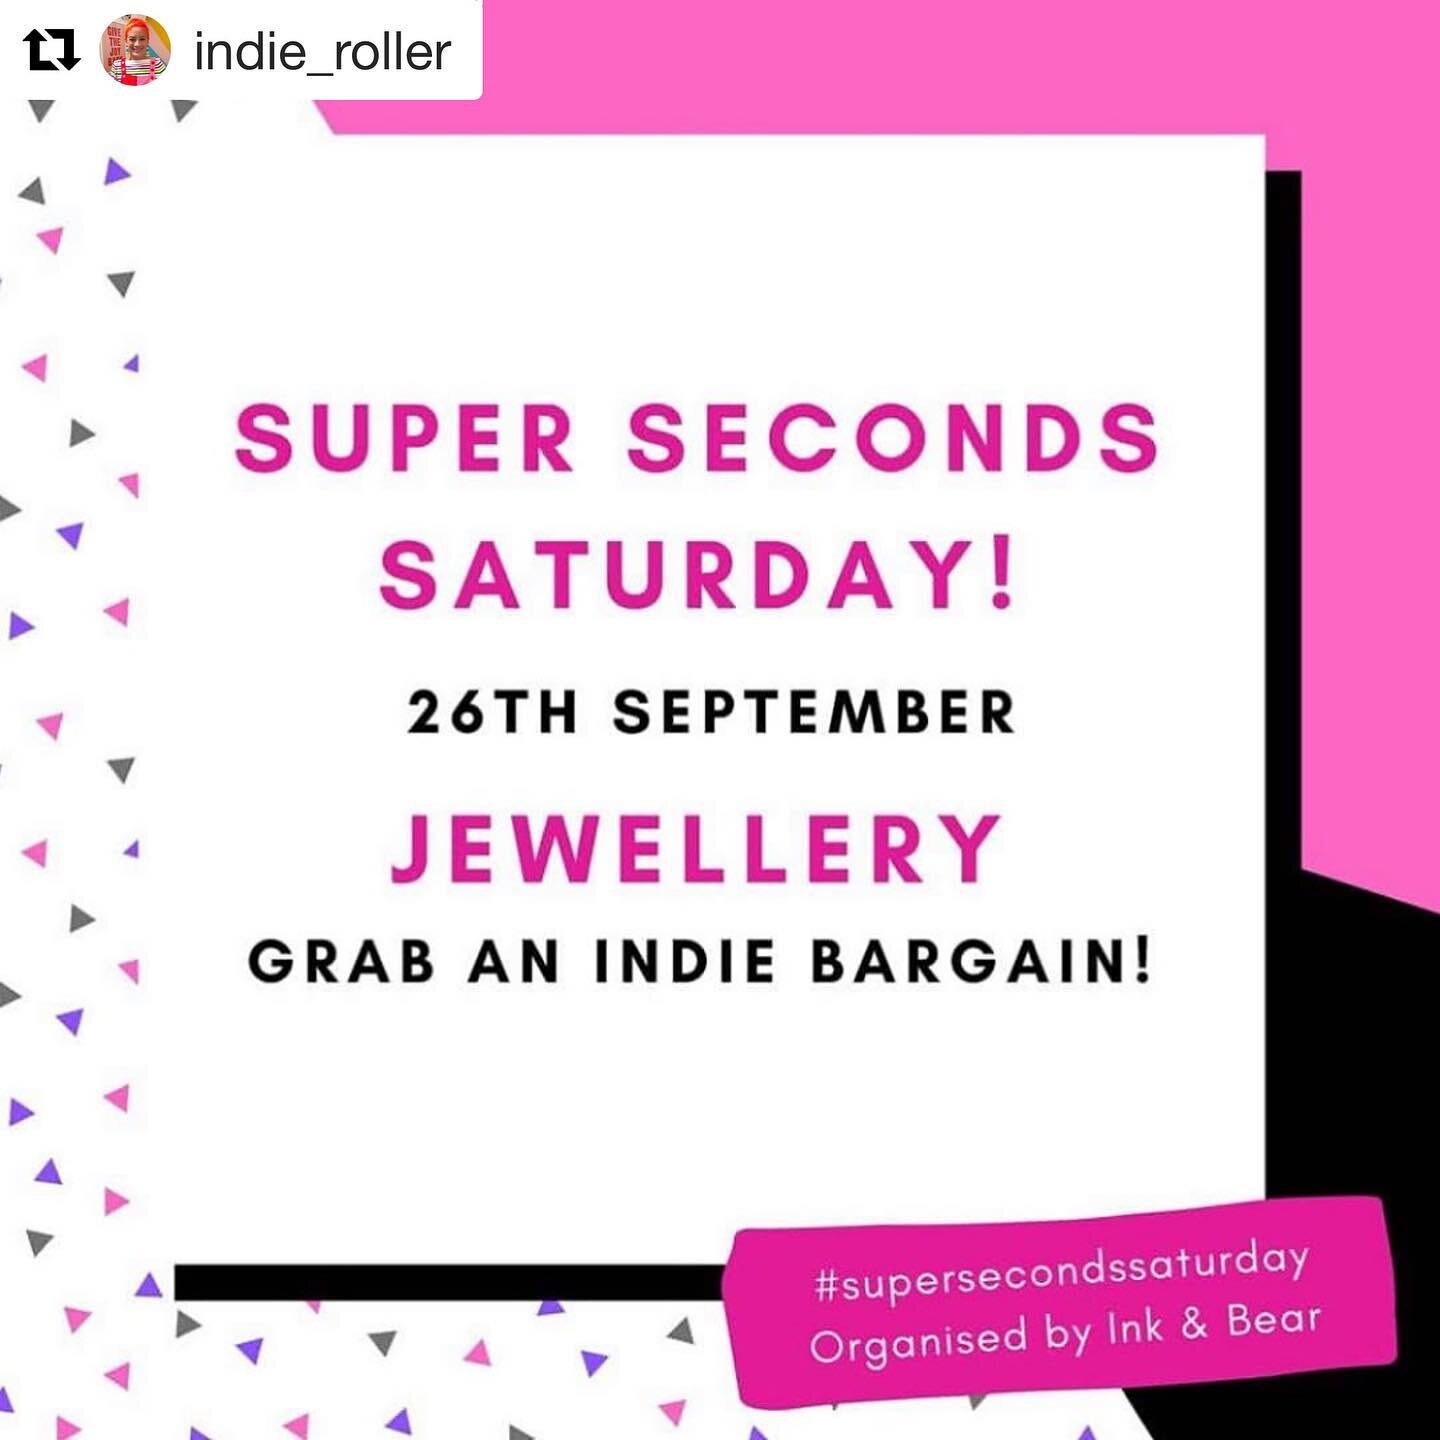 I&rsquo;m taking part in the #creativecollaborationmarket today 10am-10pm. So important to support each other! 

#Repost @indie_roller with @get_repost
・・・
💖 SHOP INDIE TODAY 💖 Two members of our brilliant #indieroller community have organised mamm